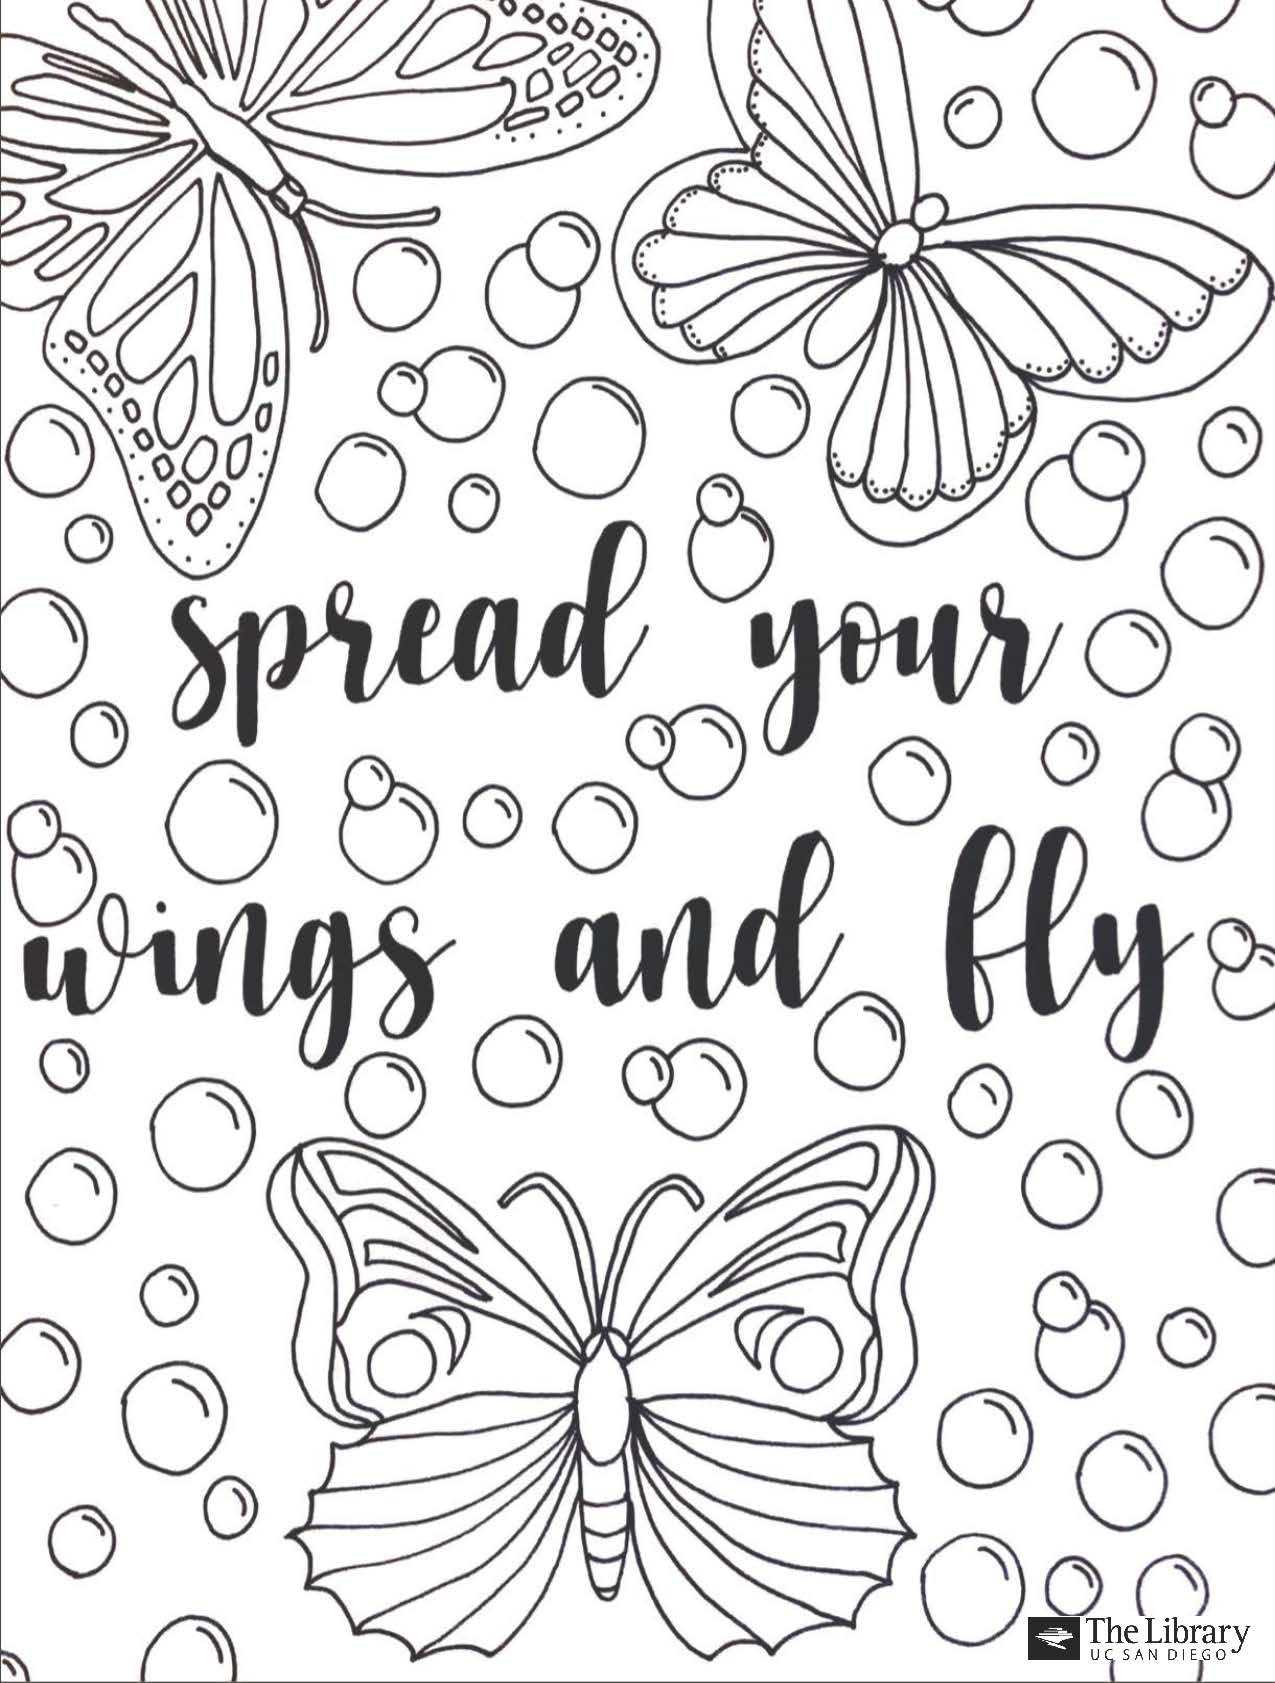 Download "Spread Your Wings and Fly" coloring page.